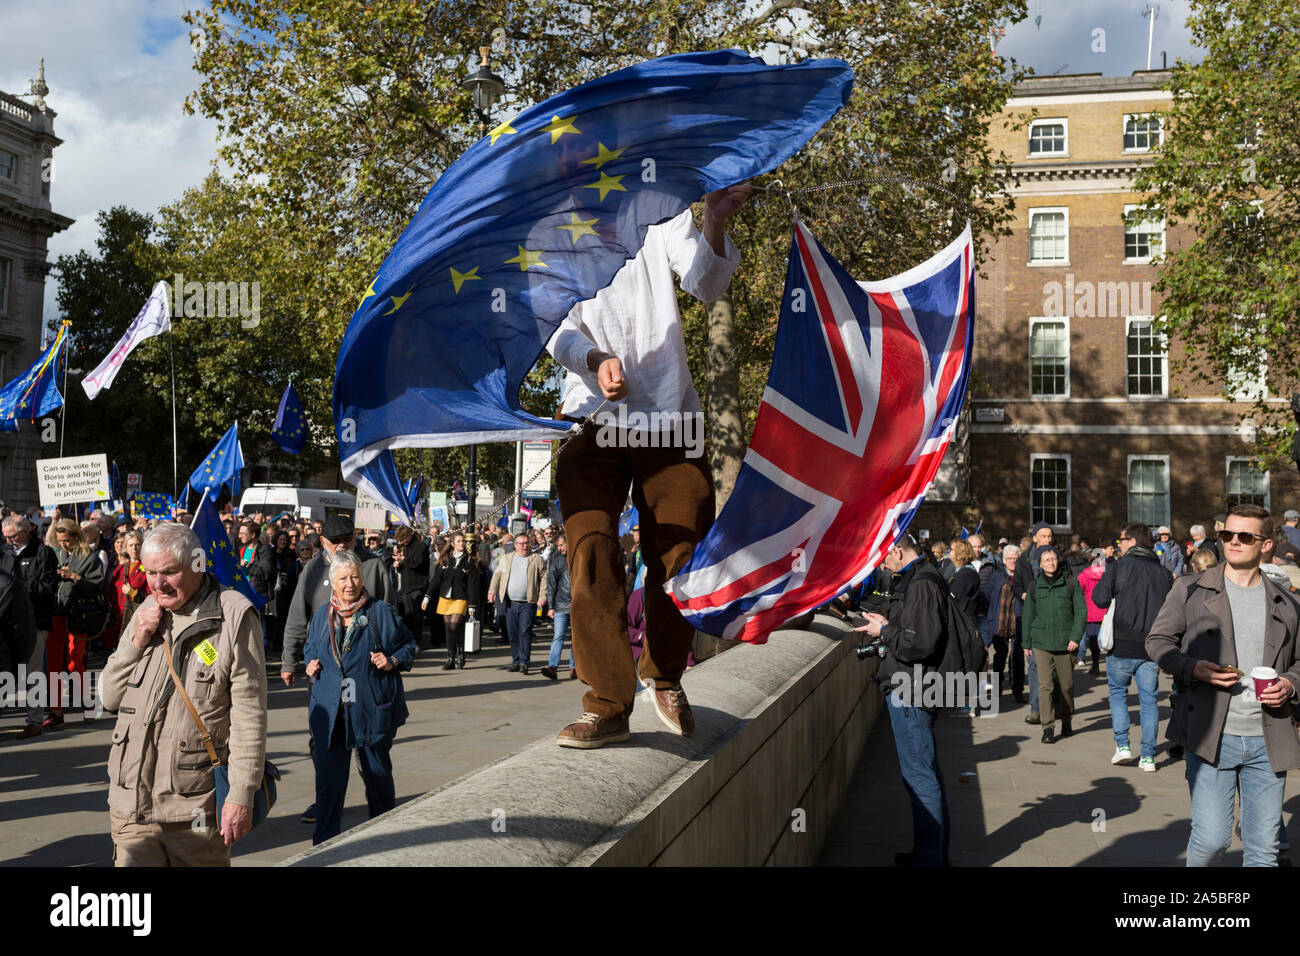 On the day that Members of Parliament sat on a Saturday (the first time in 37 years and dubbed 'Super Saturday') in order to vote for Prime Minister Boris Johnson's Brexit deal with the EU in Brussels, a young man waves an EU and Union Jack flags alongside a million Remainers (according to organisers) who marched through the capital to voice their opposition to a Brexit and calling for a peoples' Vote, on 19th October 2019, in London, England. Stock Photo